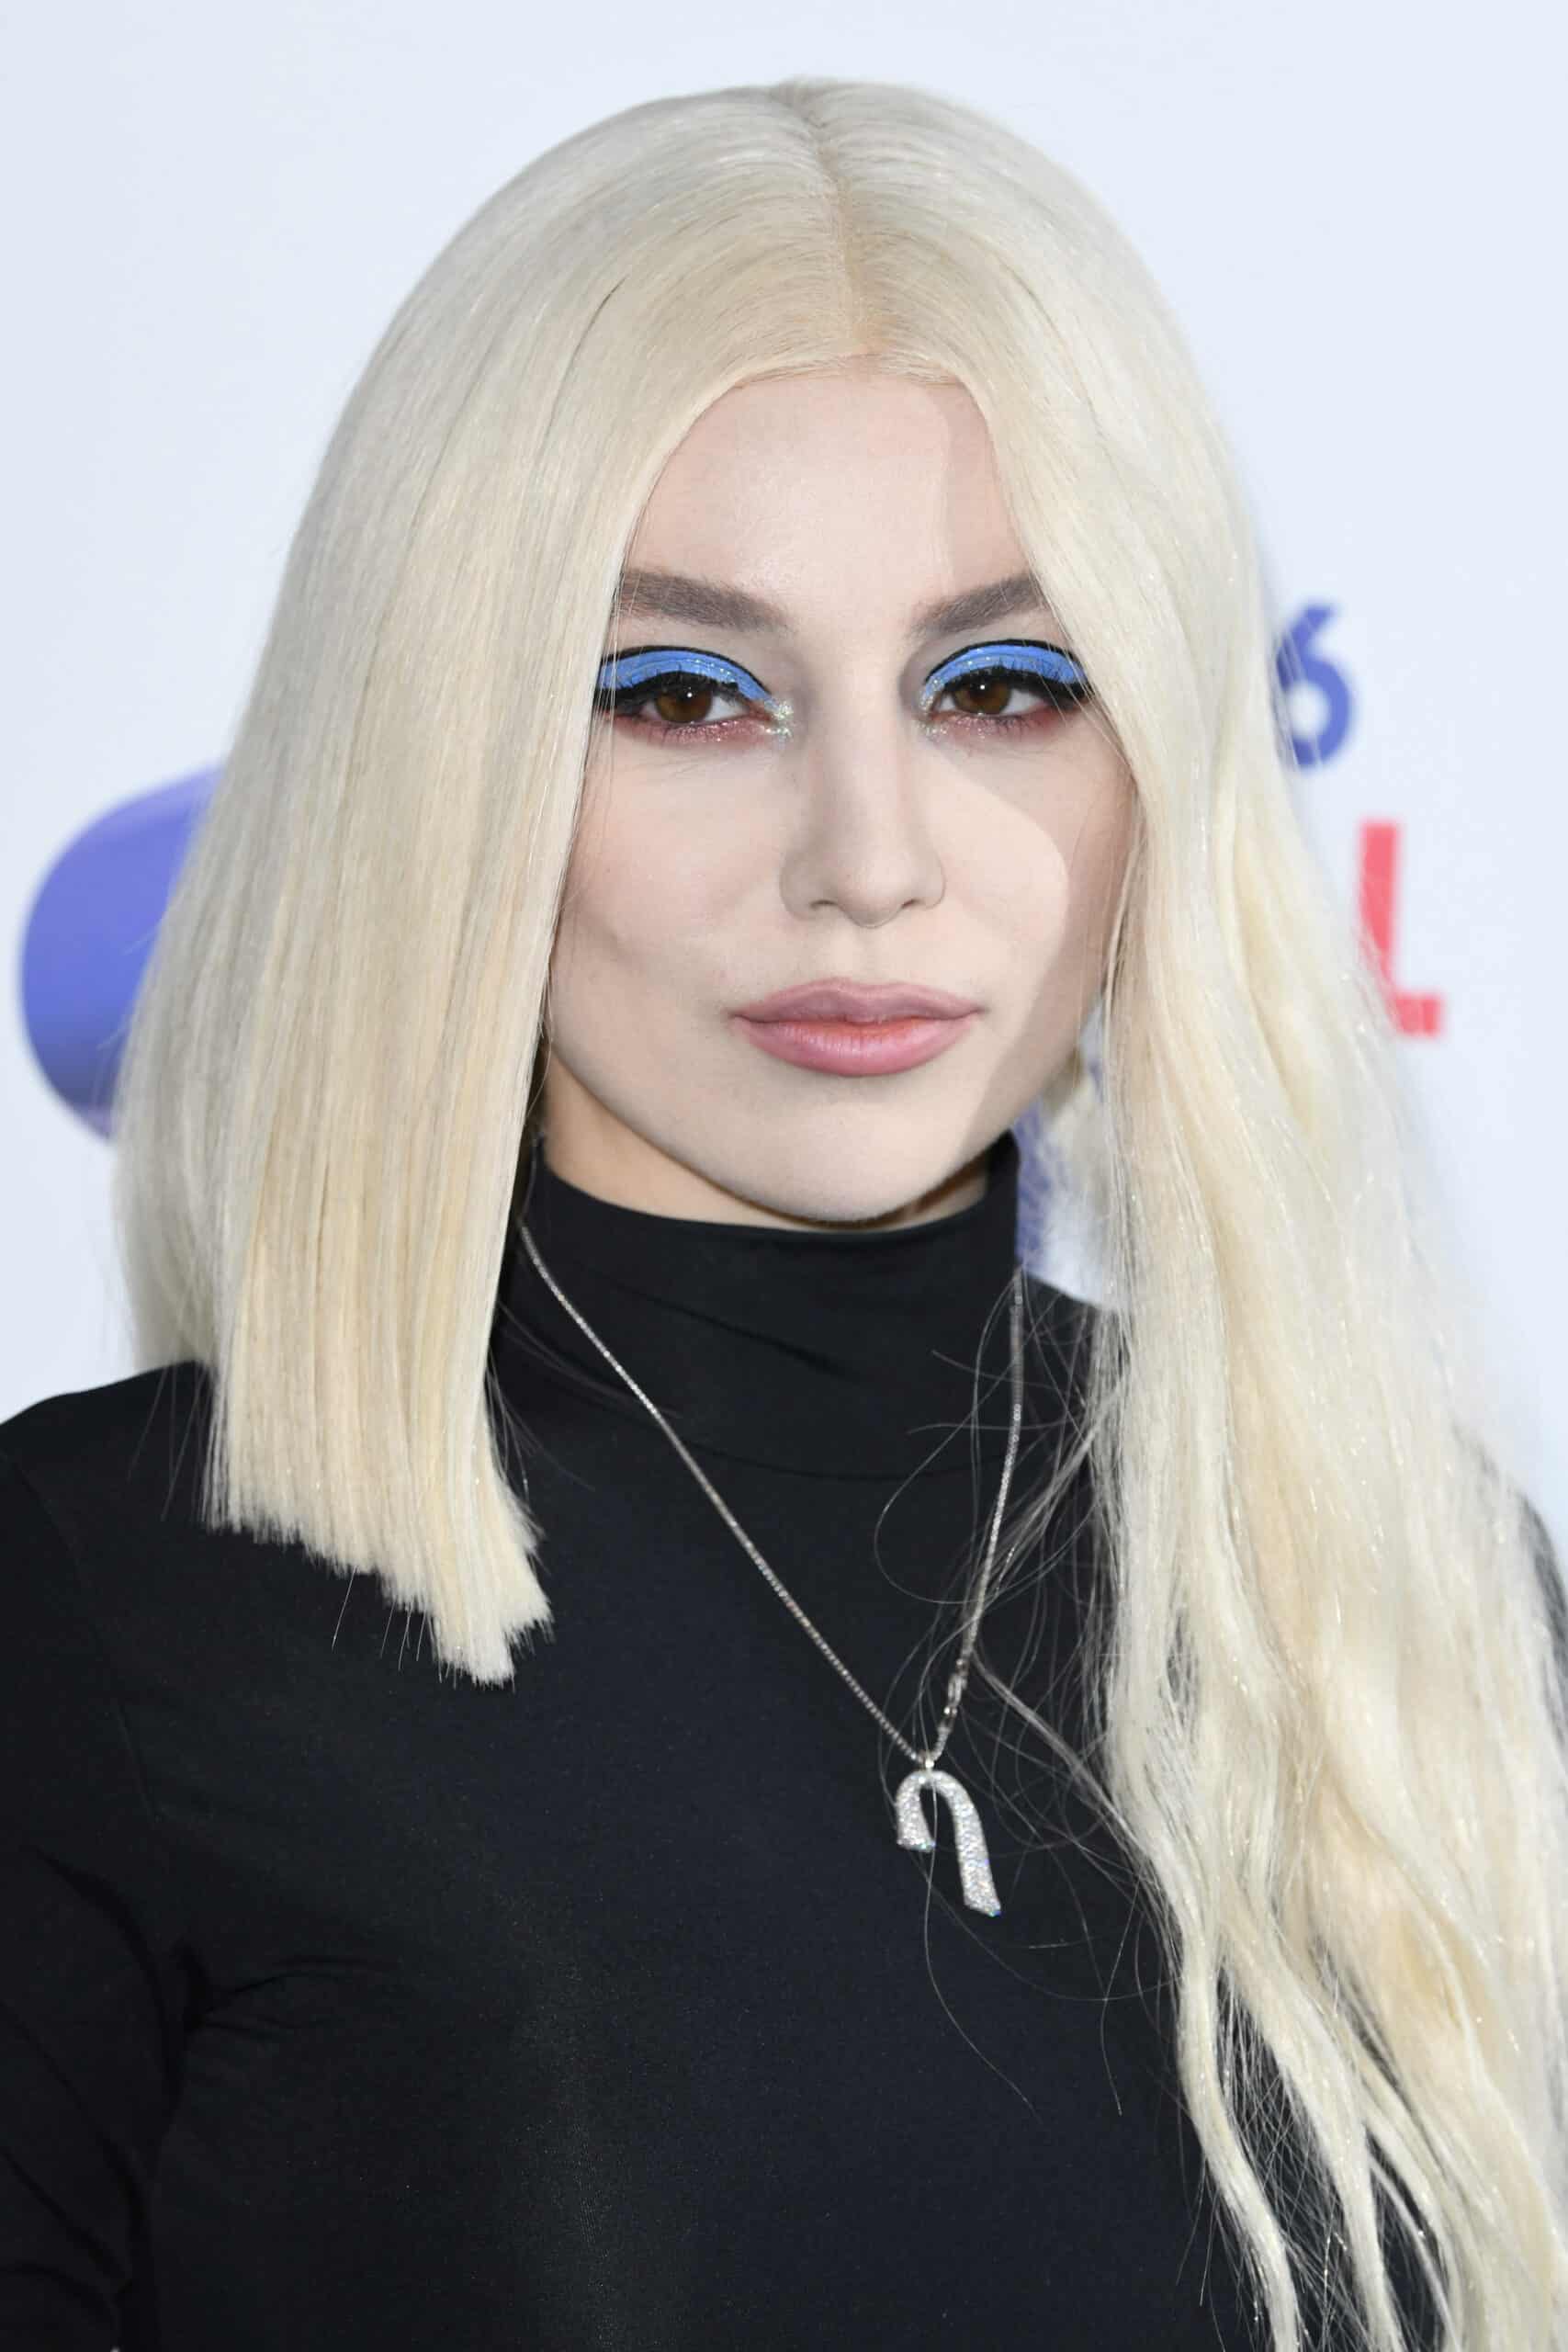 Does Ava Max Wear a Wig?